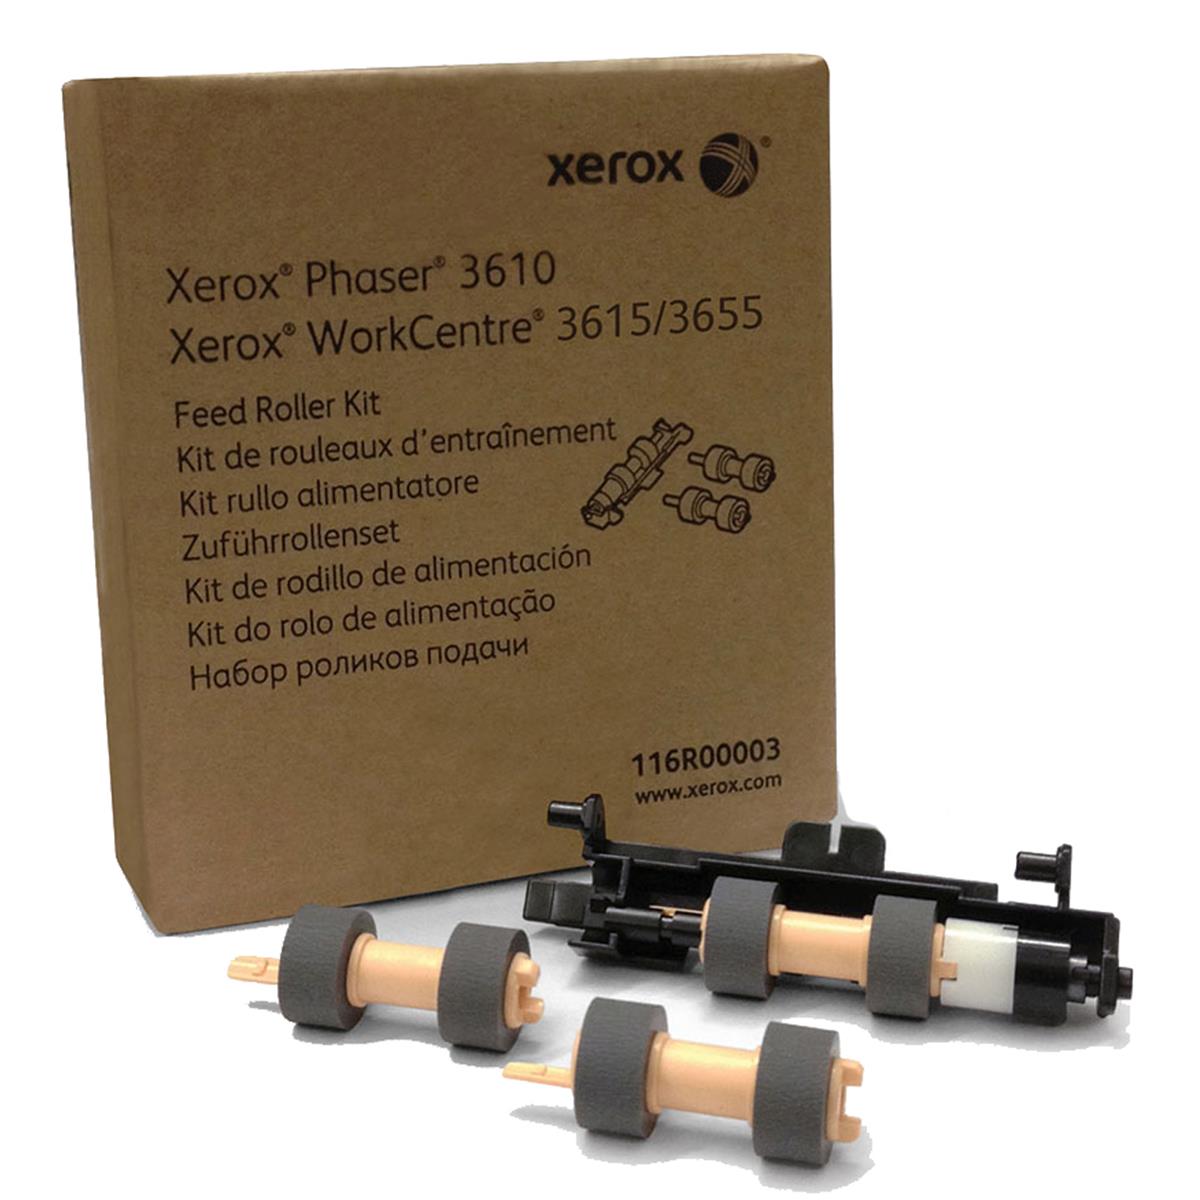 Image of Xerox Media Tray Roller Kit for Phaser 3610 and WorkCentre 3615/3655 Printers